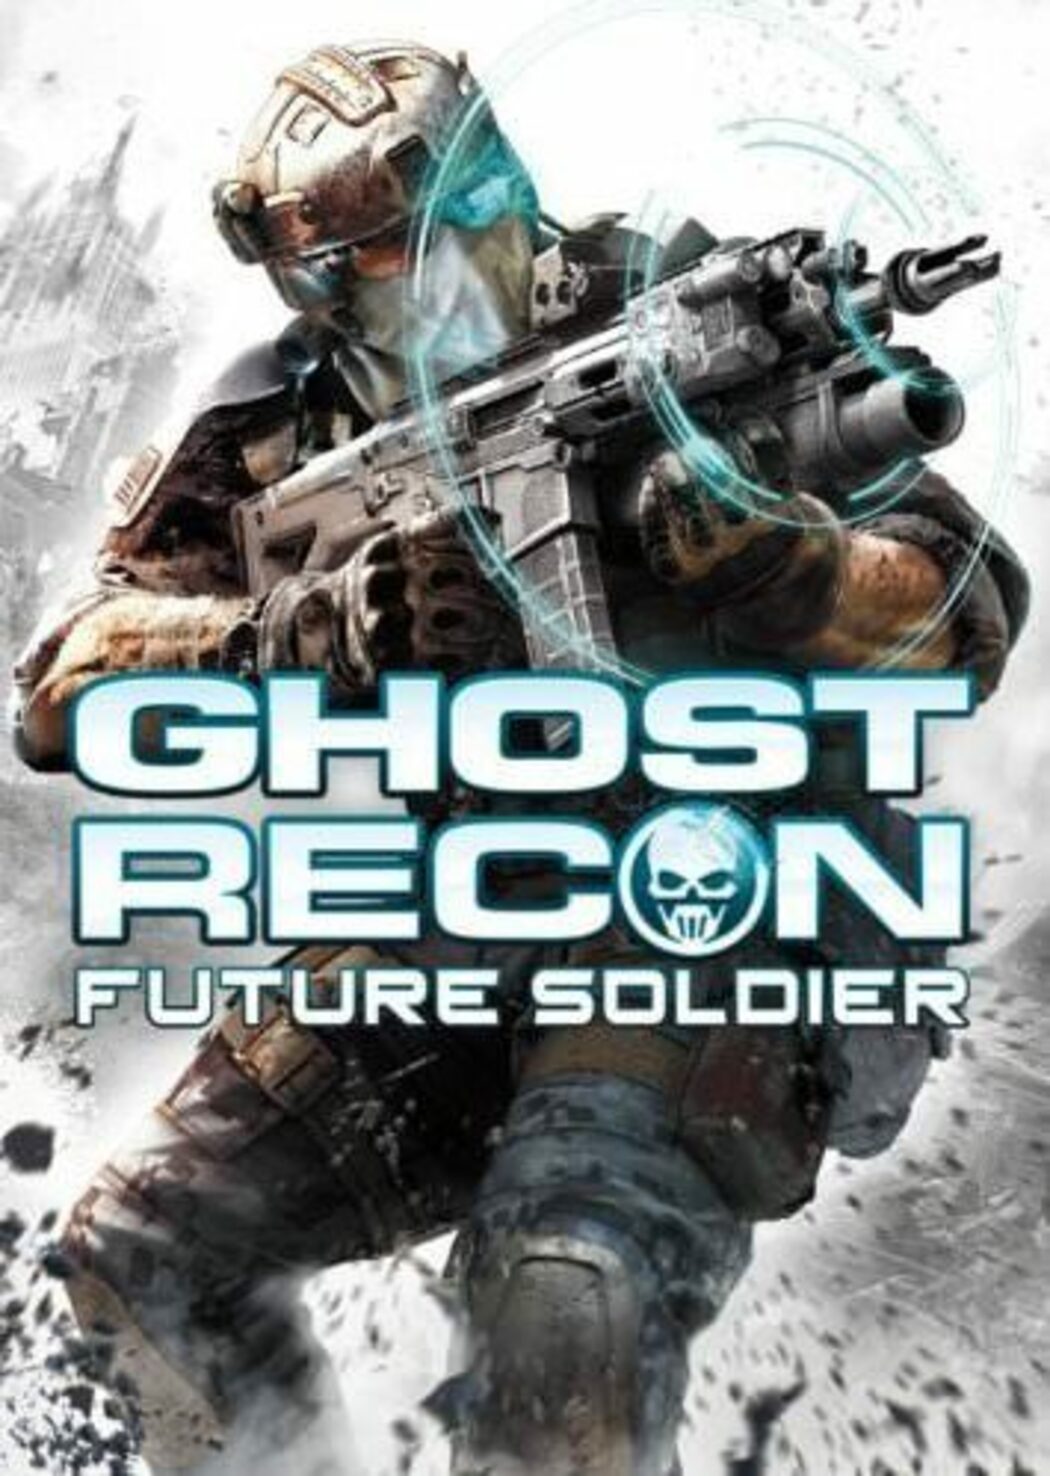 ghost recon future soldier co op campaign